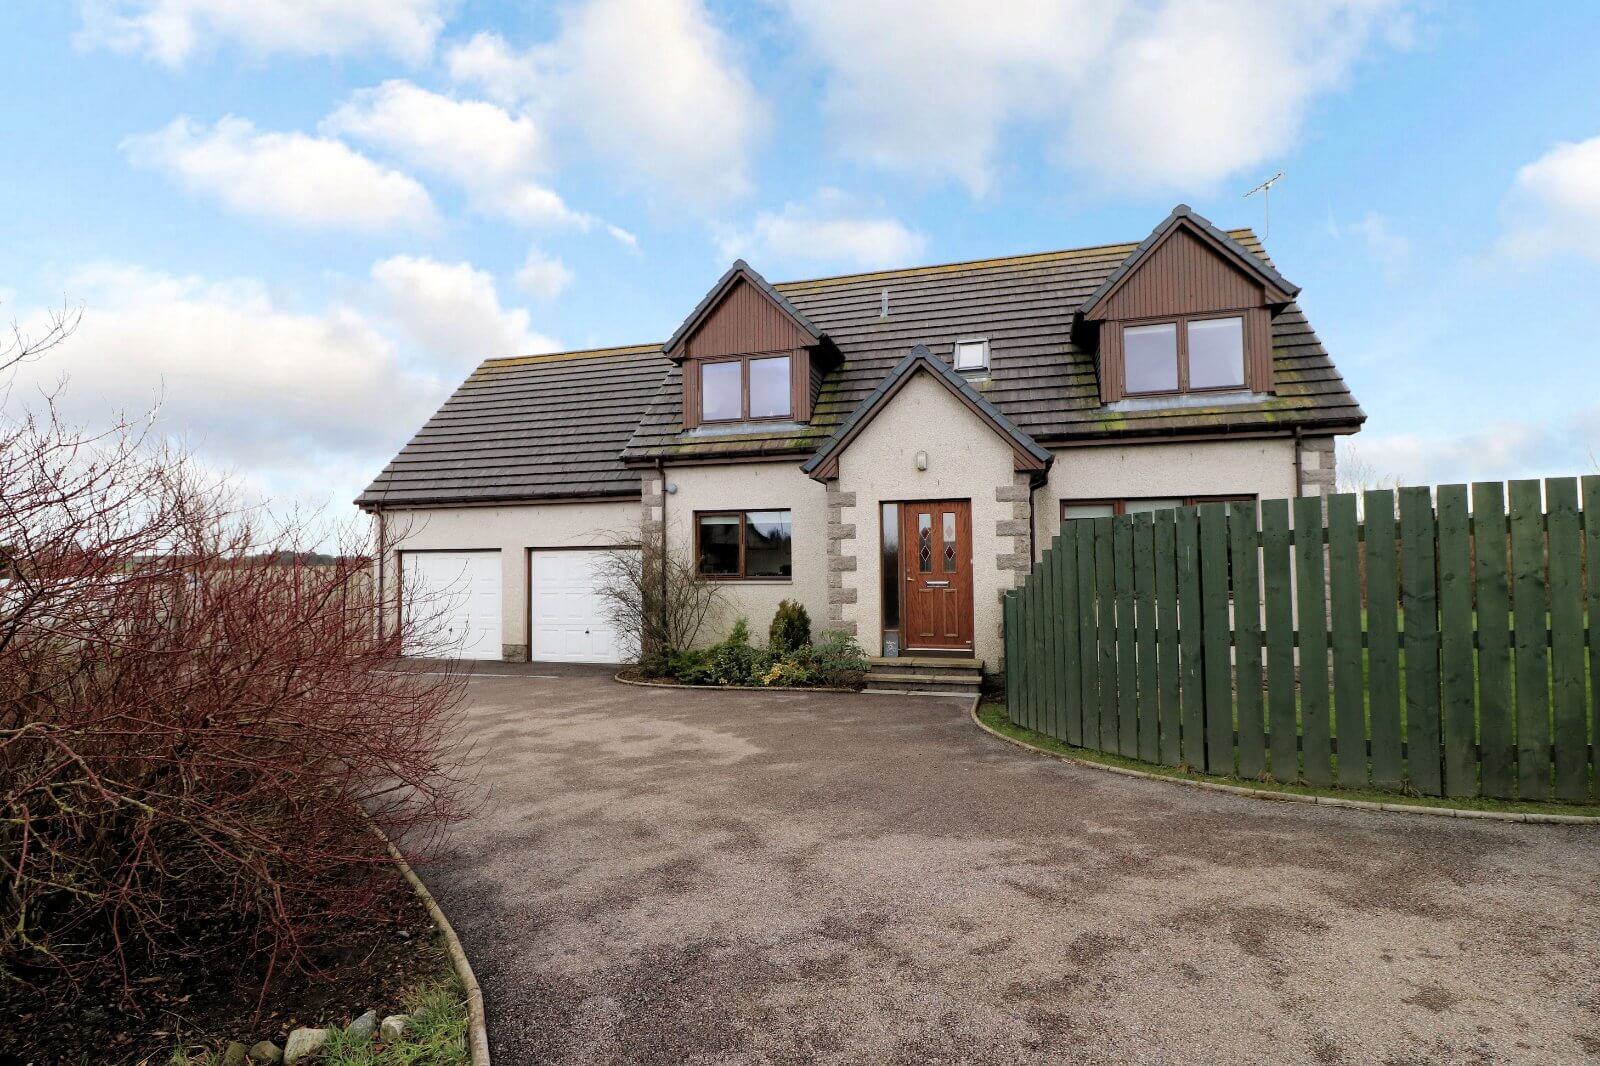 Our latest properties for sale and to let (26th February 2020)